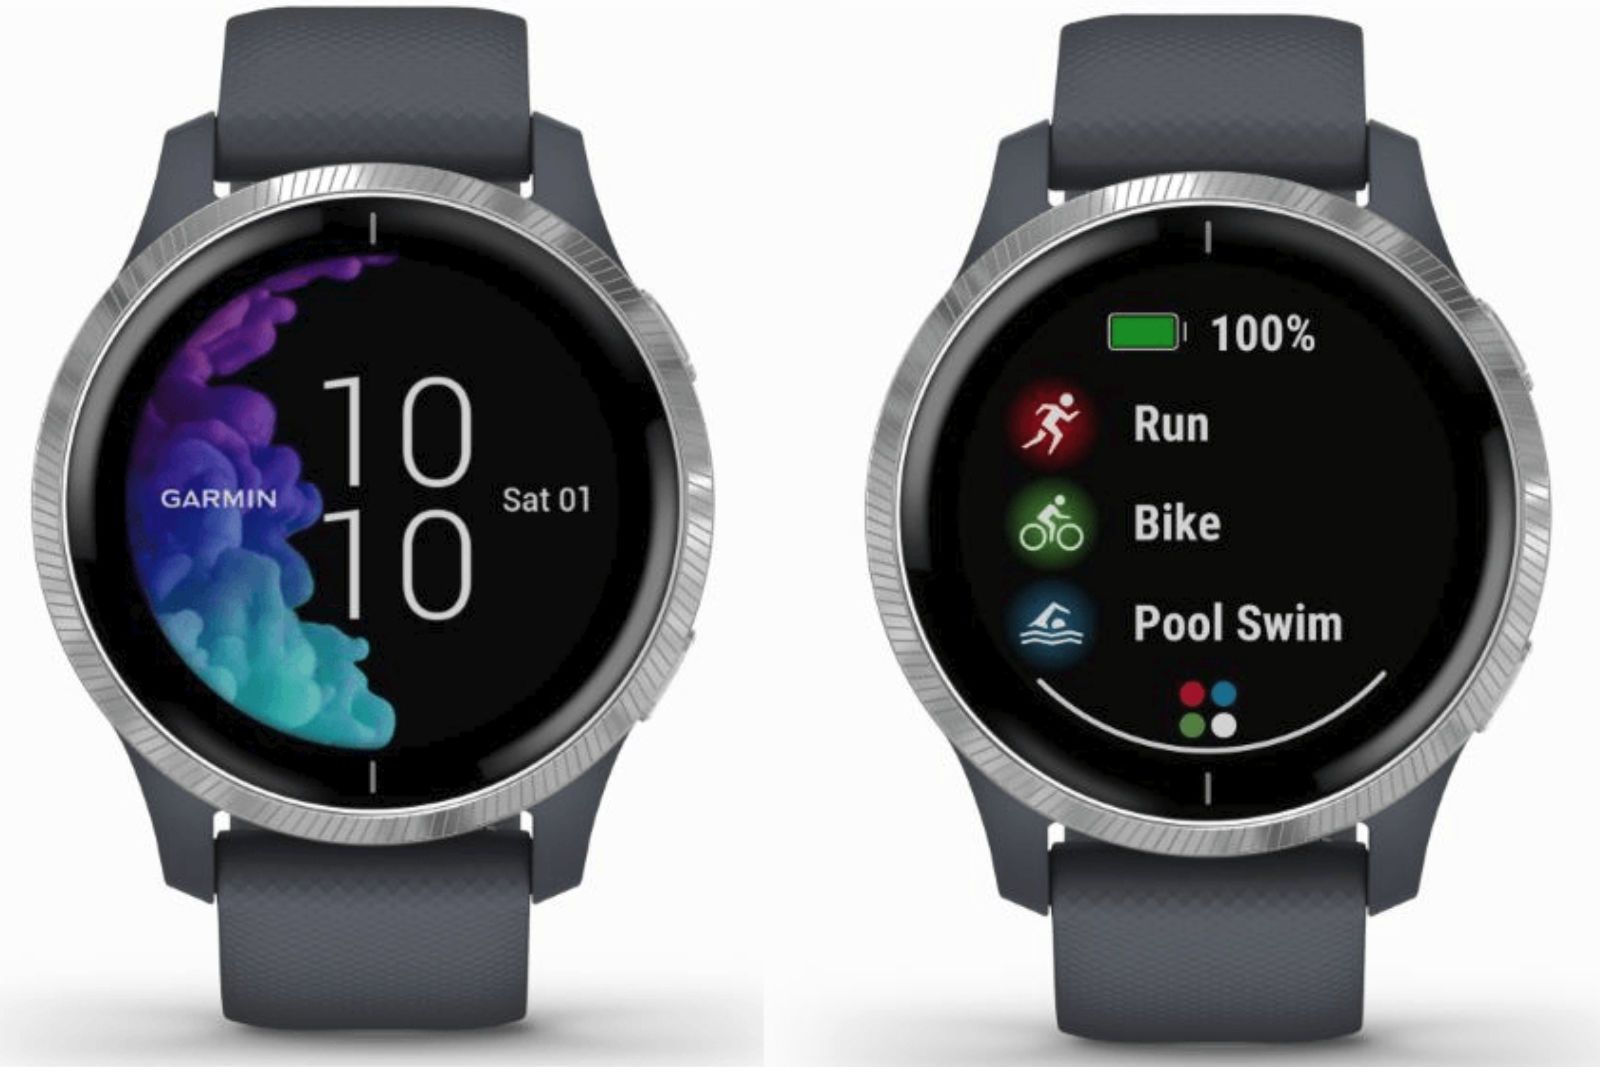 Six new Garmin watches have leaked showing an entire new lineup image 3